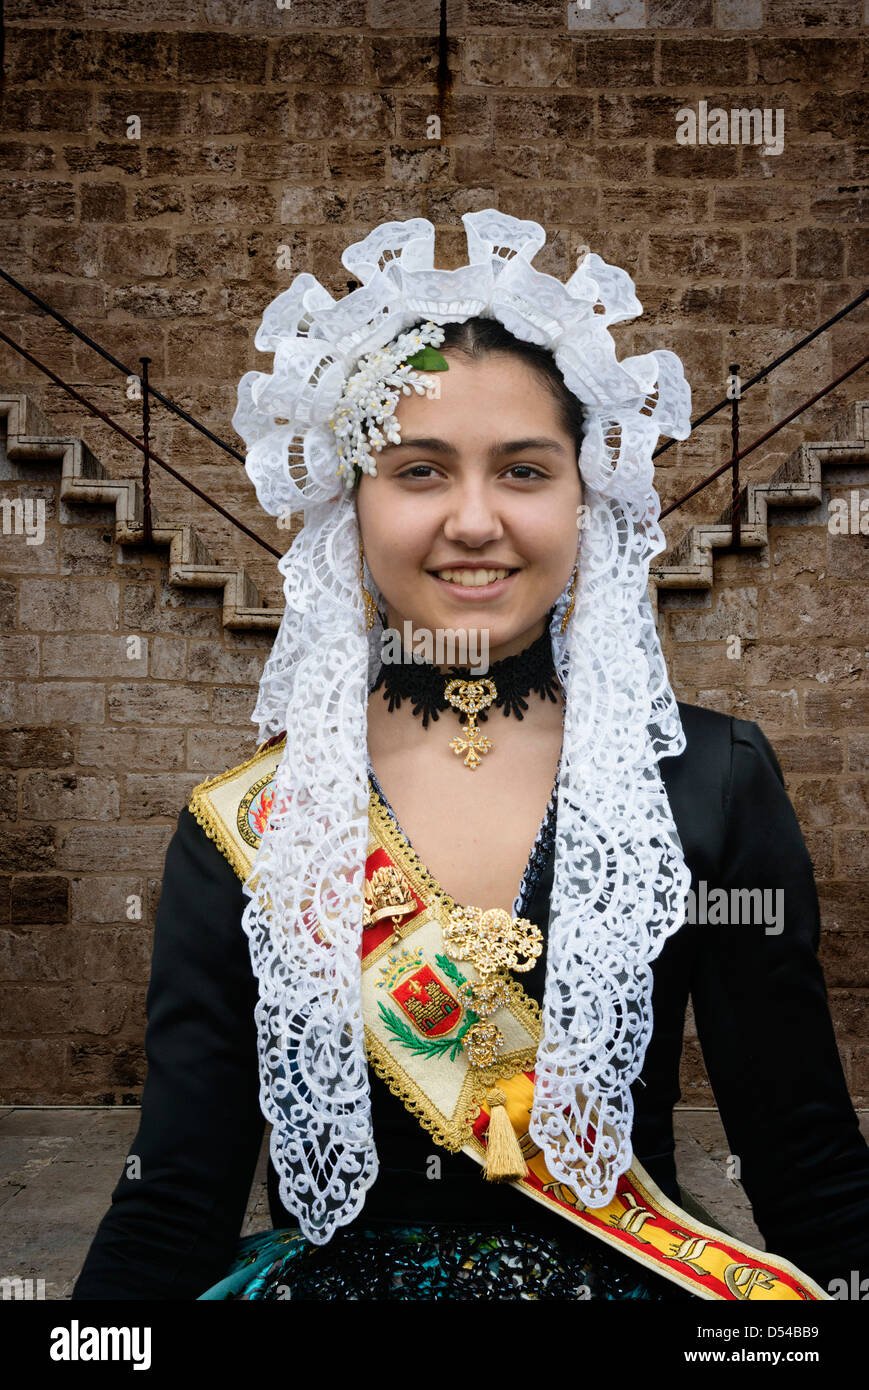 Spanish Girl in Traditional Costume including lace mantilla  veil or shawl during las Fallas or Falles festival in Valencia Spain Stock Photo